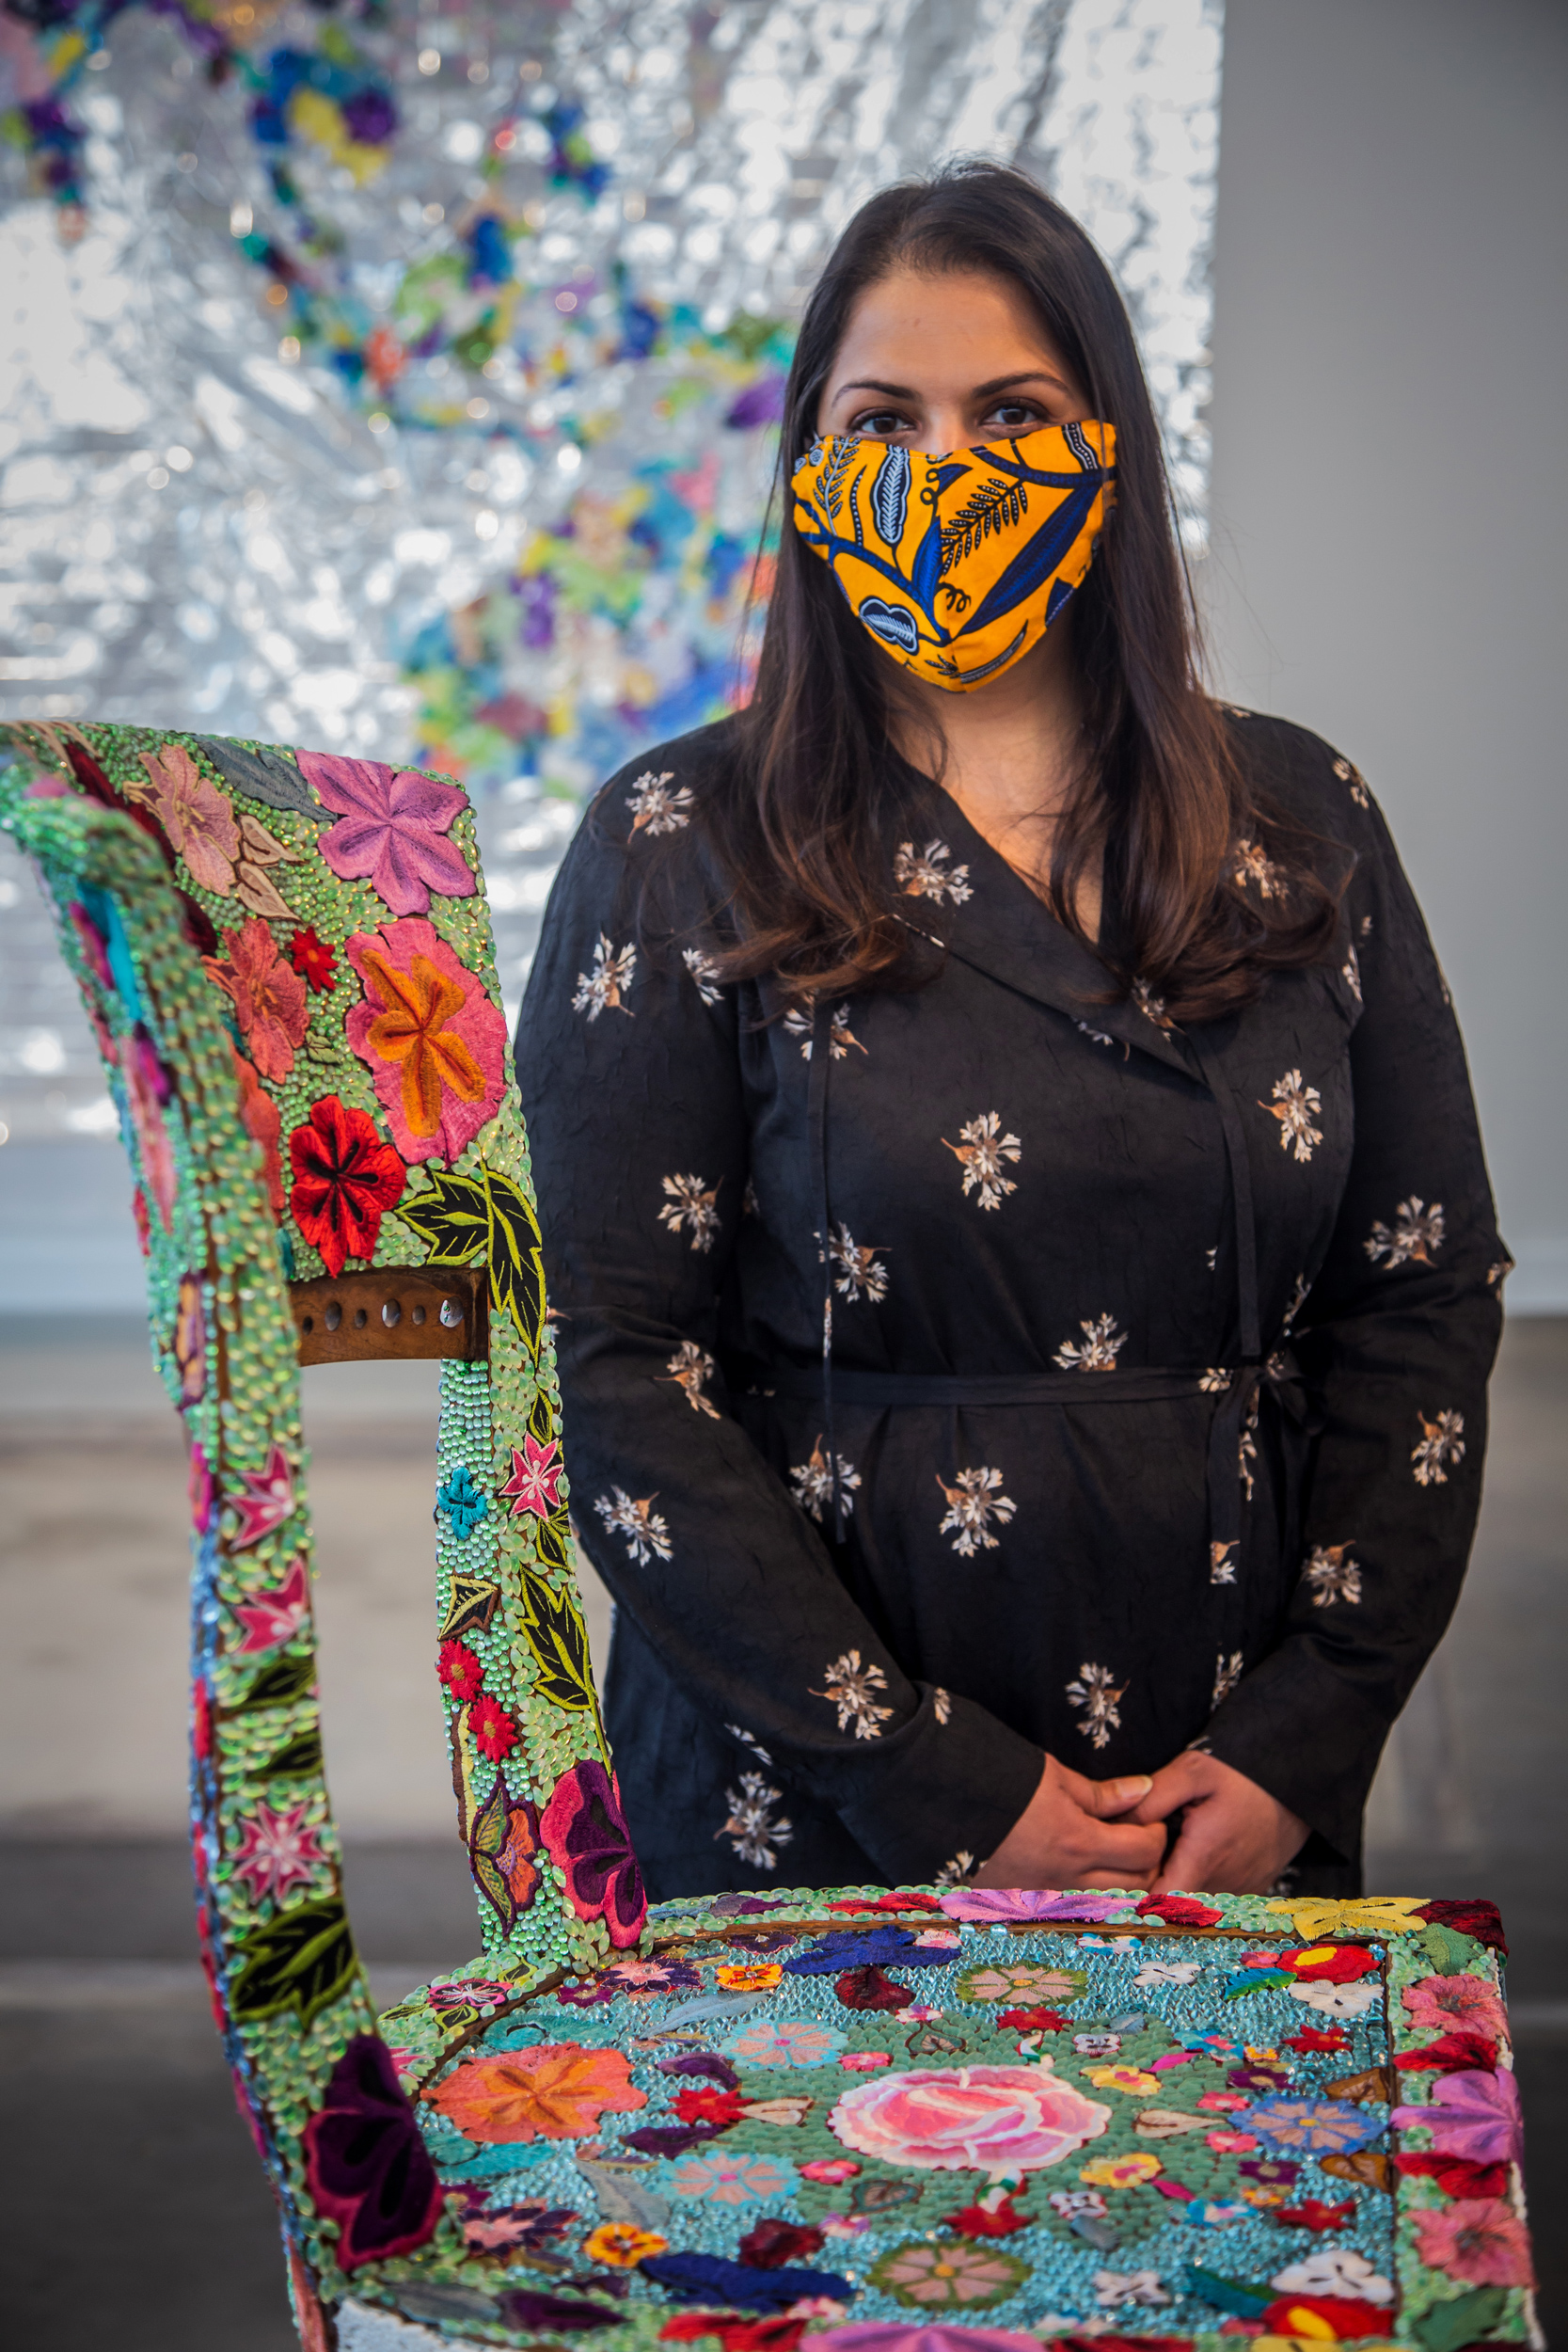 woman with a mask on standing next to the beaded chair